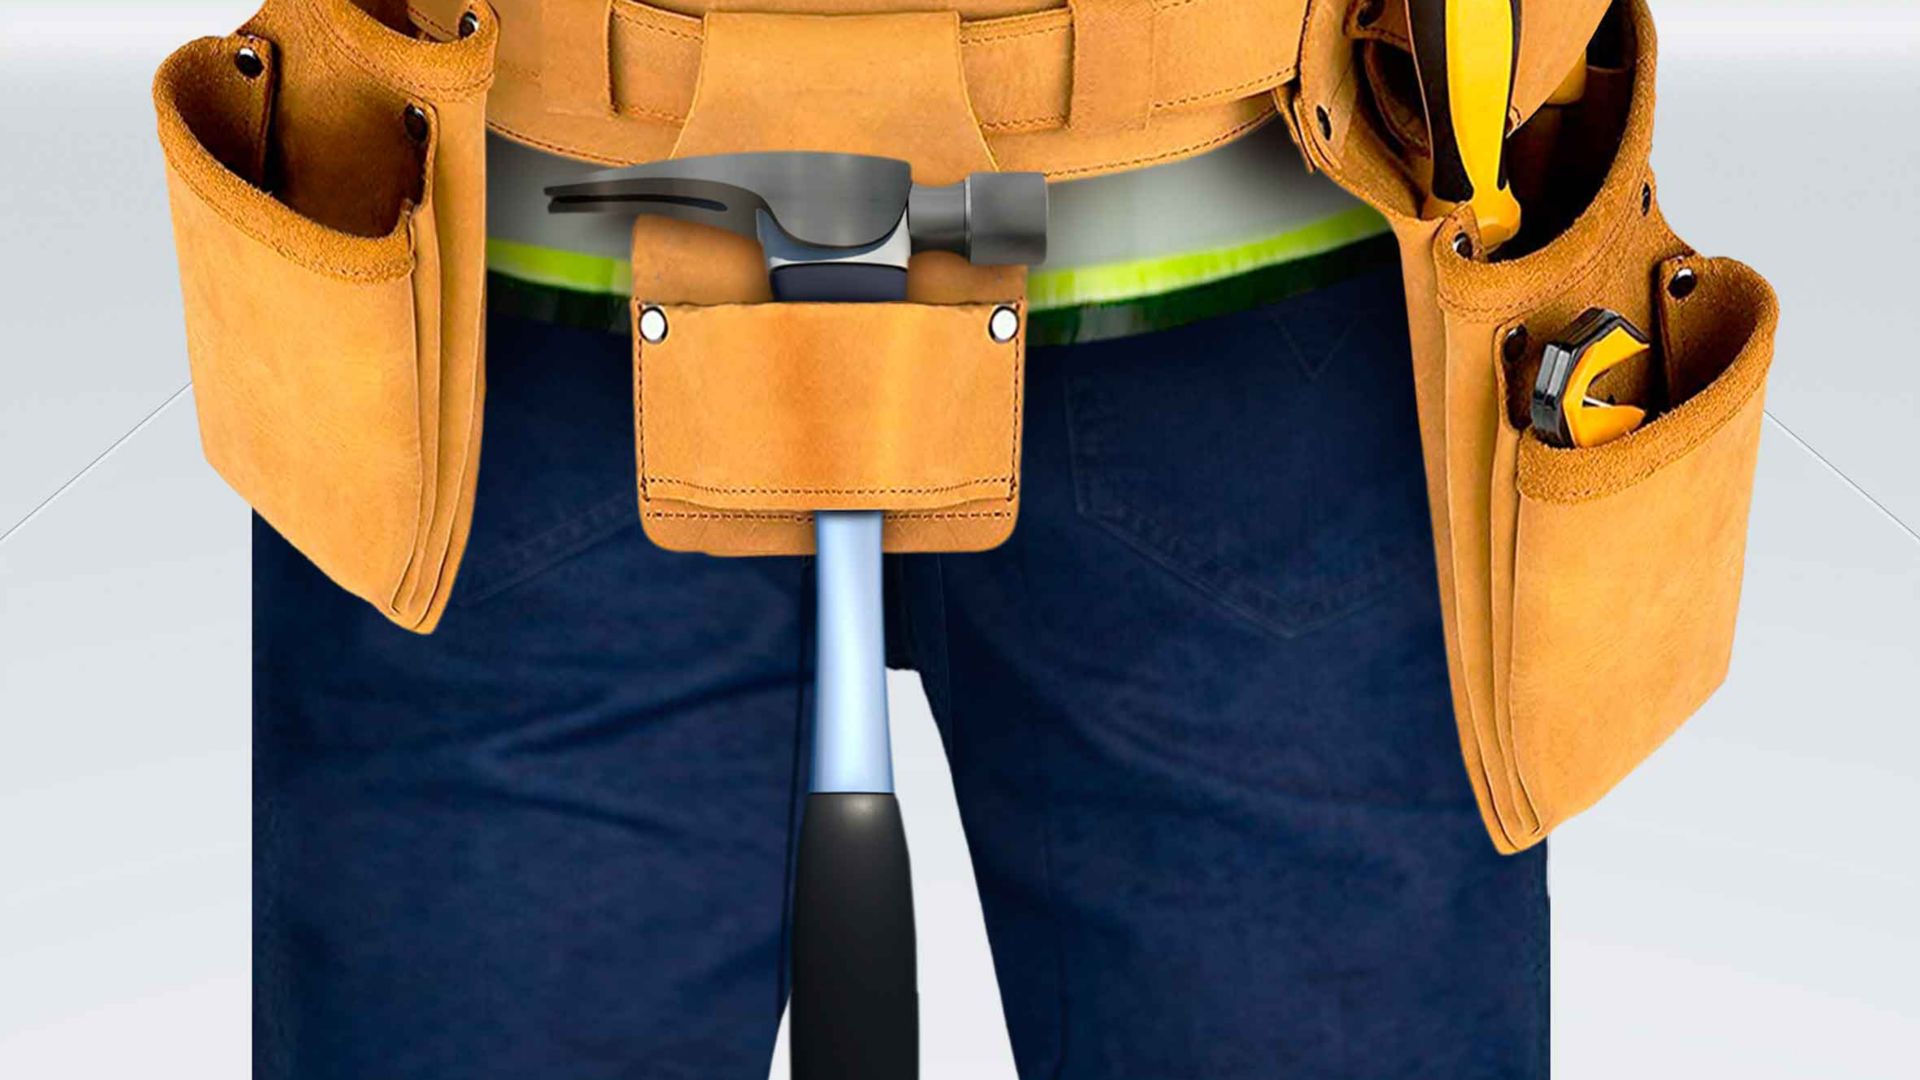 Illustration for Sika roof protection concept showing tool belt on worker with hammer